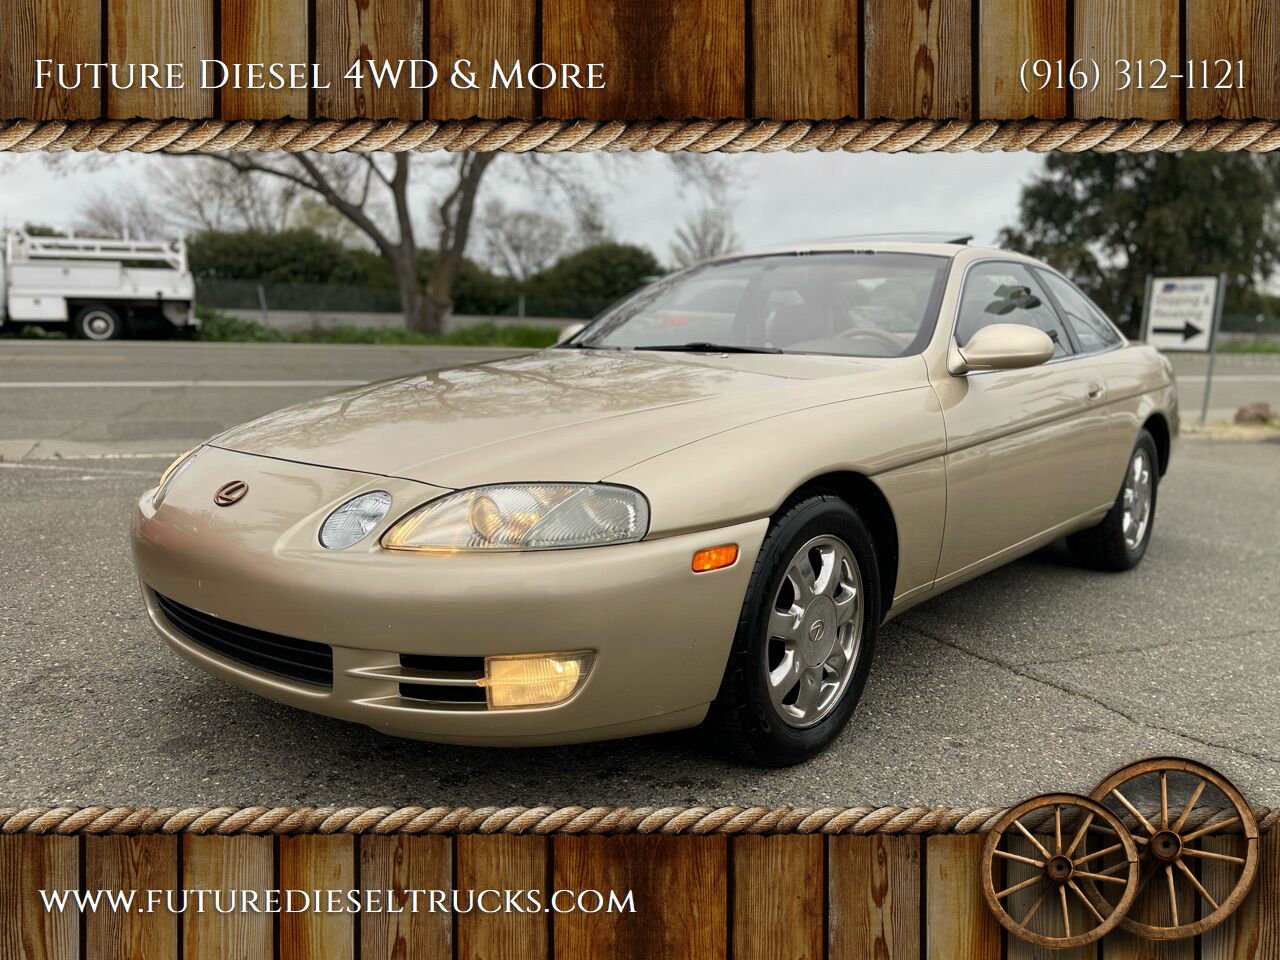 Used Lexus SC 400 SC-400, Imported, Immaculate Condition, Low Milage